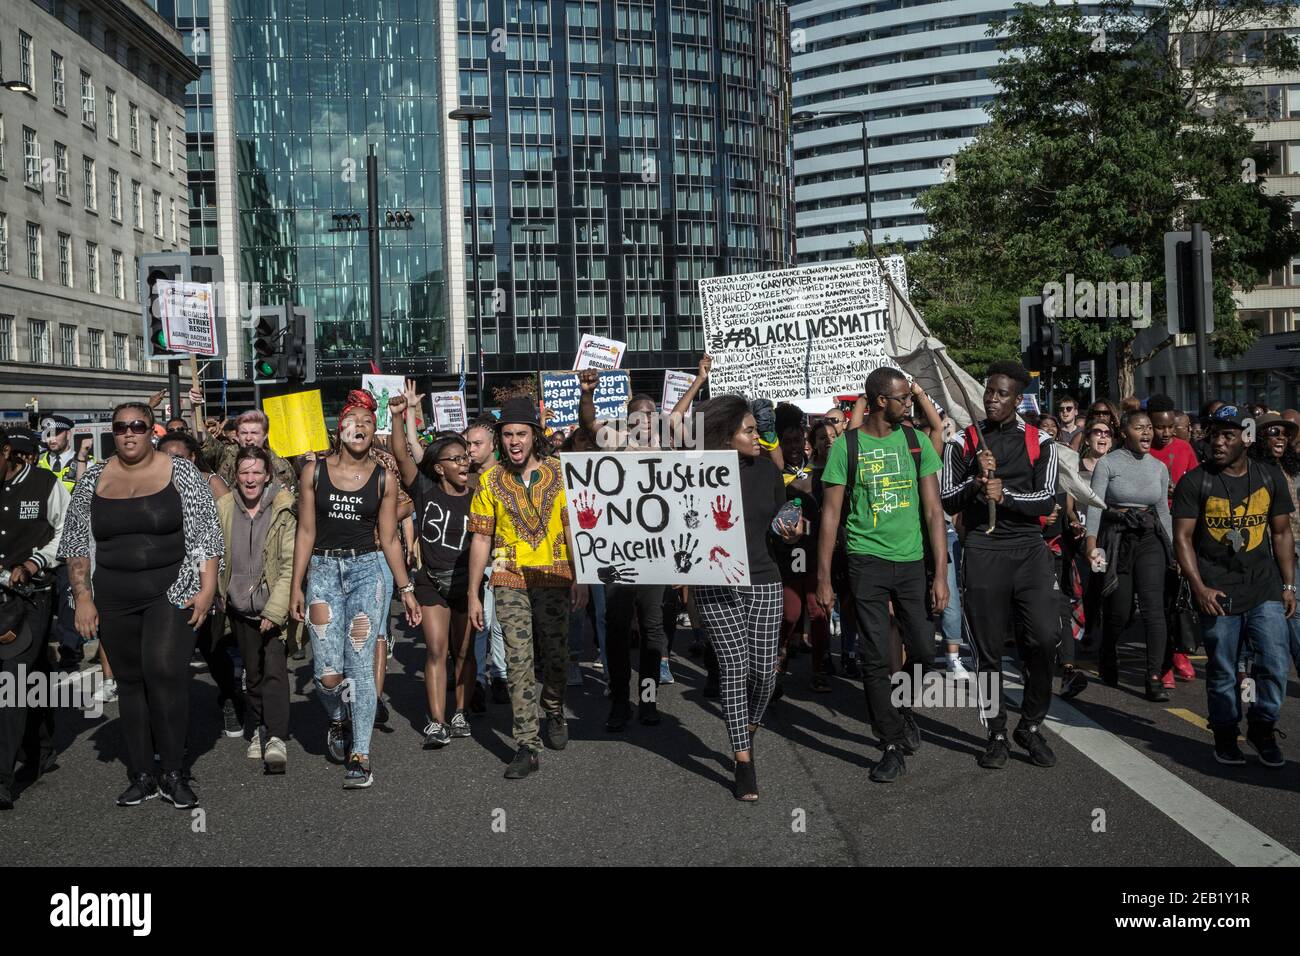 Black Lives Matter protesters march through Westminster towards Downing Street on a nationwide day of action across the country. London, UK. Stock Photo